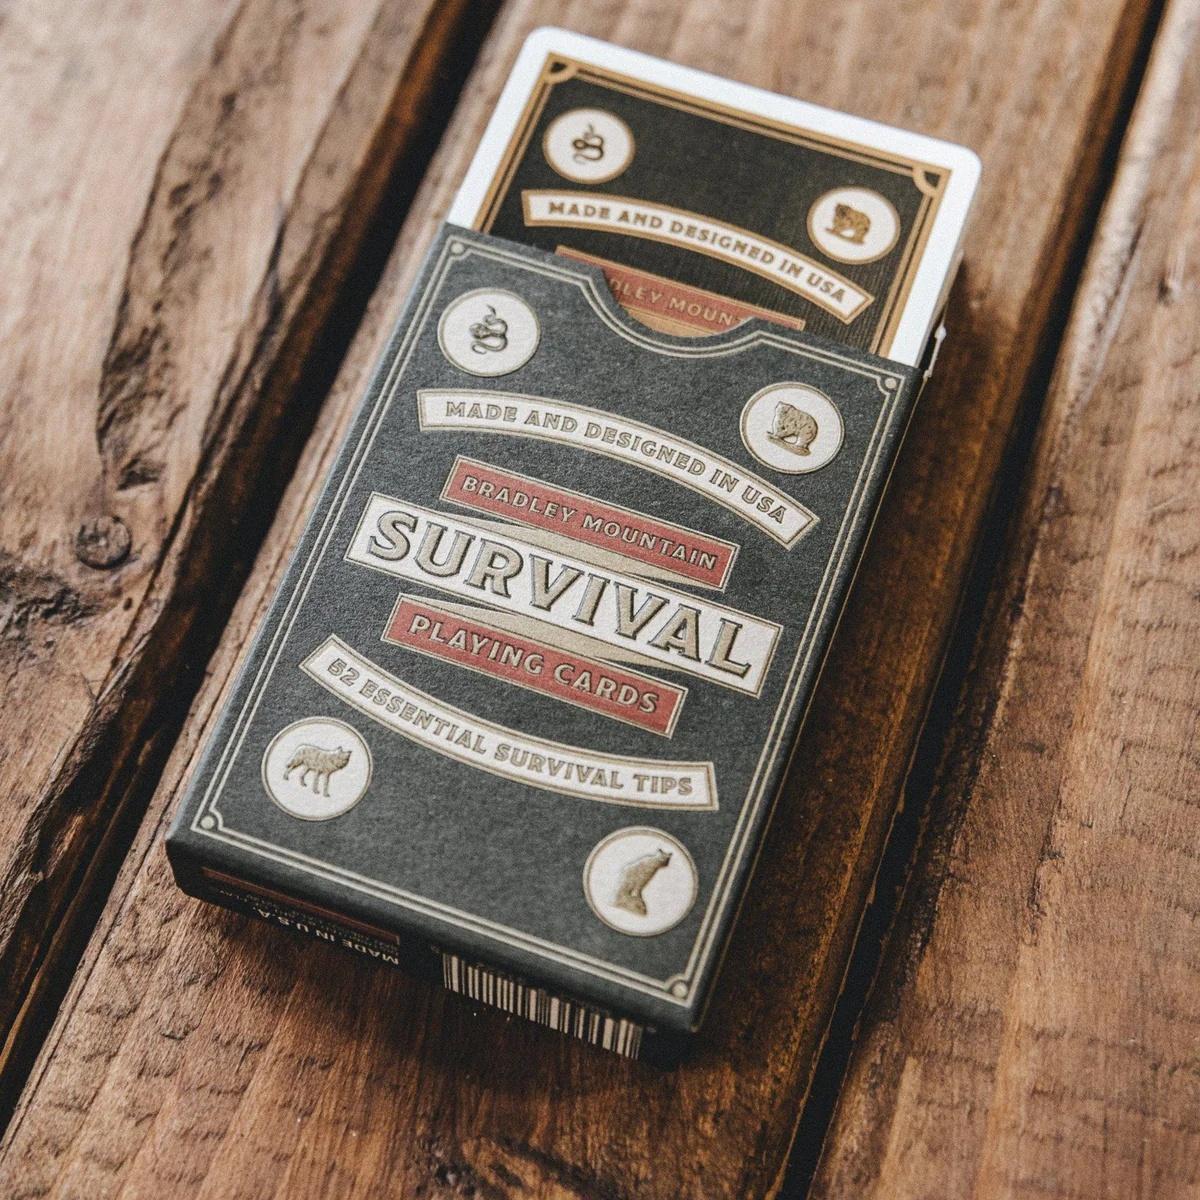 Survival Playing Cards Charcoal - Playing Cards